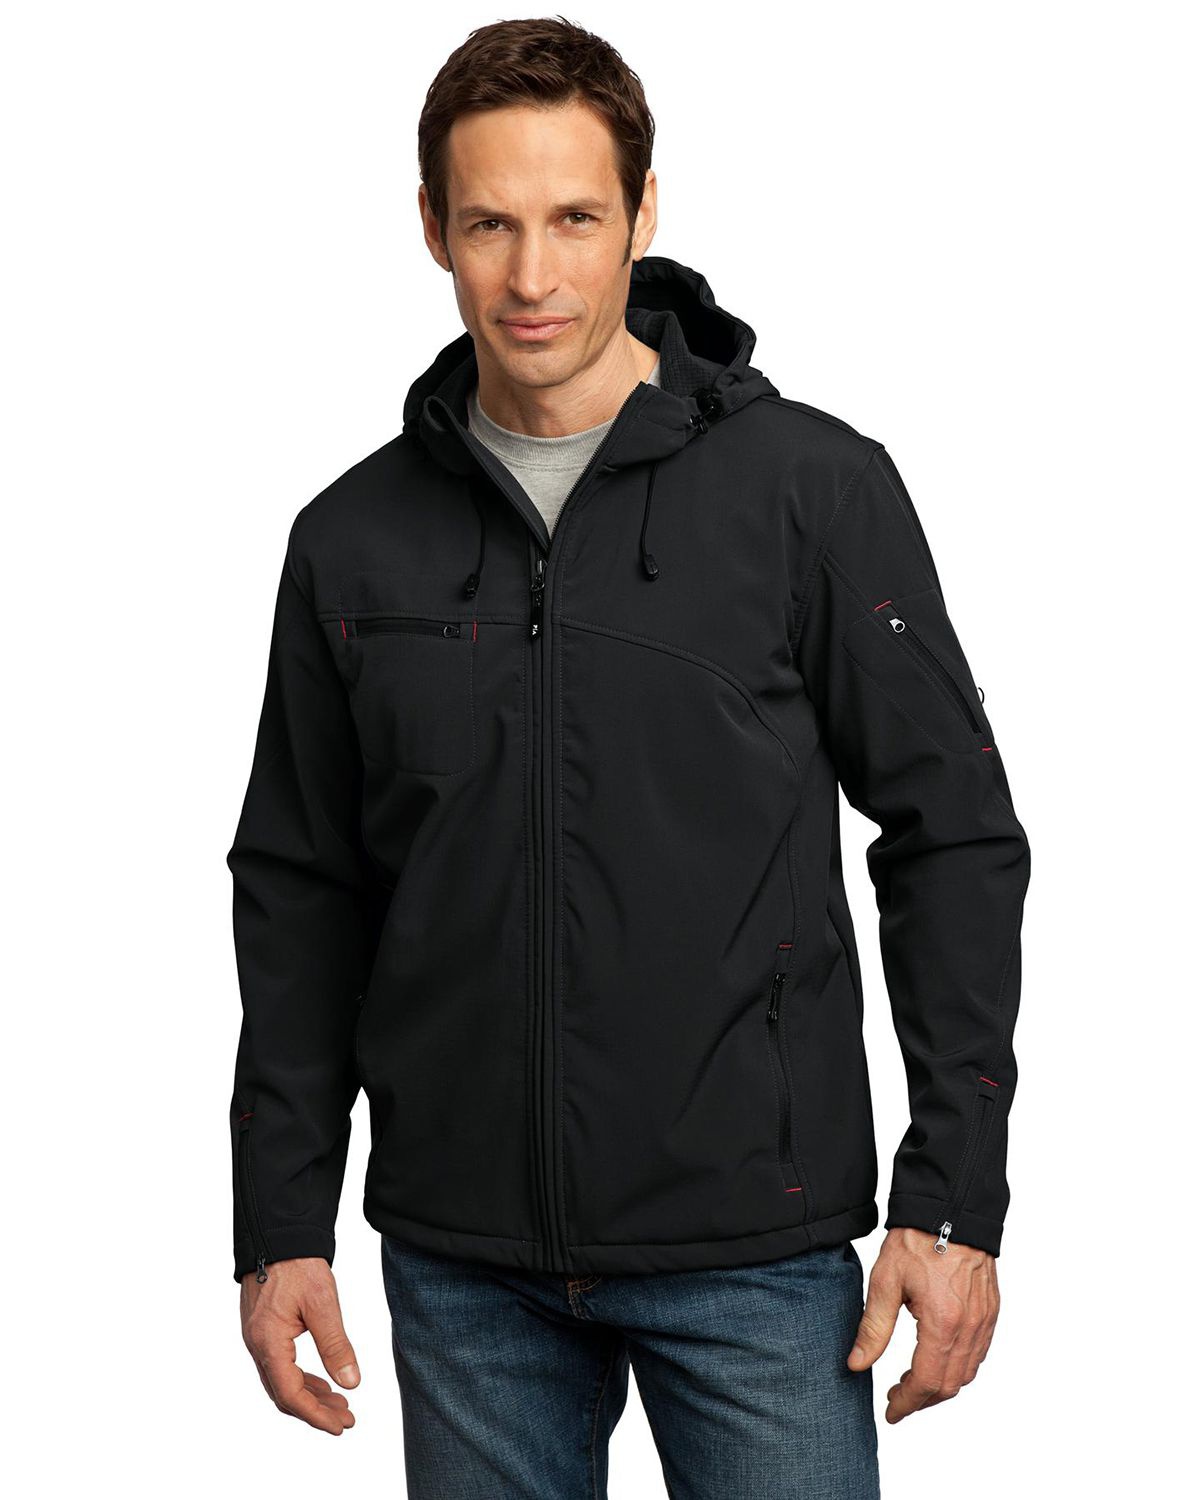 'Port Authority J706 Textured Hooded Soft Shell Jacket'